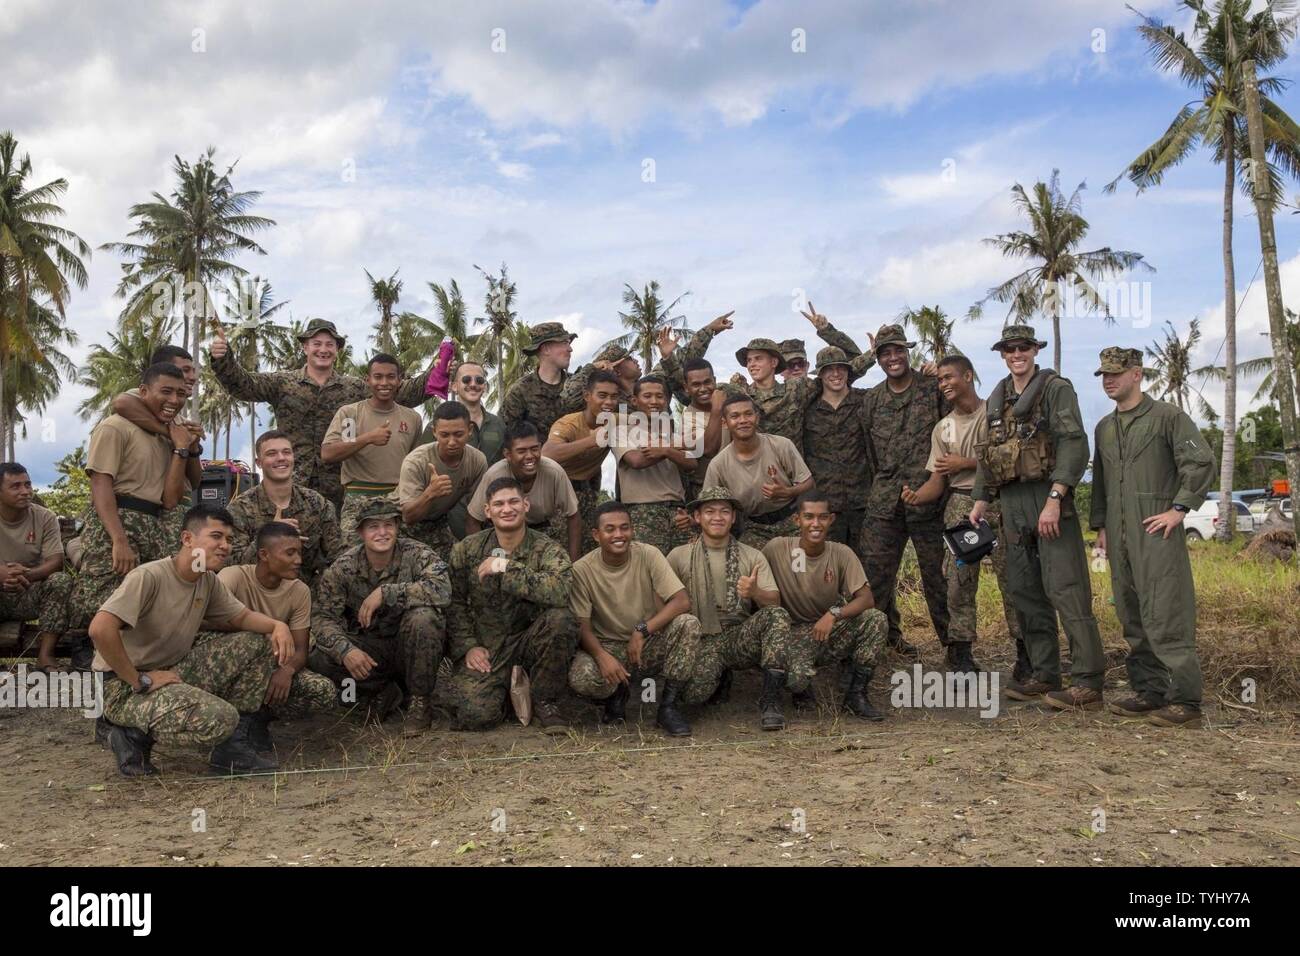 SABAH PROVINCE, Malaysia (Nov. 11, 2016) U.S. Marines and Malaysian Soldiers pose for a picture at the end of the training day in the Sabah Province, Malaysia, during Exercise Tiger Strike 2016, Nov. 11. During Tiger Strike 16, Marines with the 11th Marine Expeditionary Unit conducted partnered training with the 7th Battalion, Royal Malay Regiment, that included jungle survival, combat rubber raiding craft usage, non-lethal weapons, Marine Corps Martial Arts Program, helicopter loading and offloading drills, landing zone security/control, combat service support, and an amphibious assault. Stock Photo